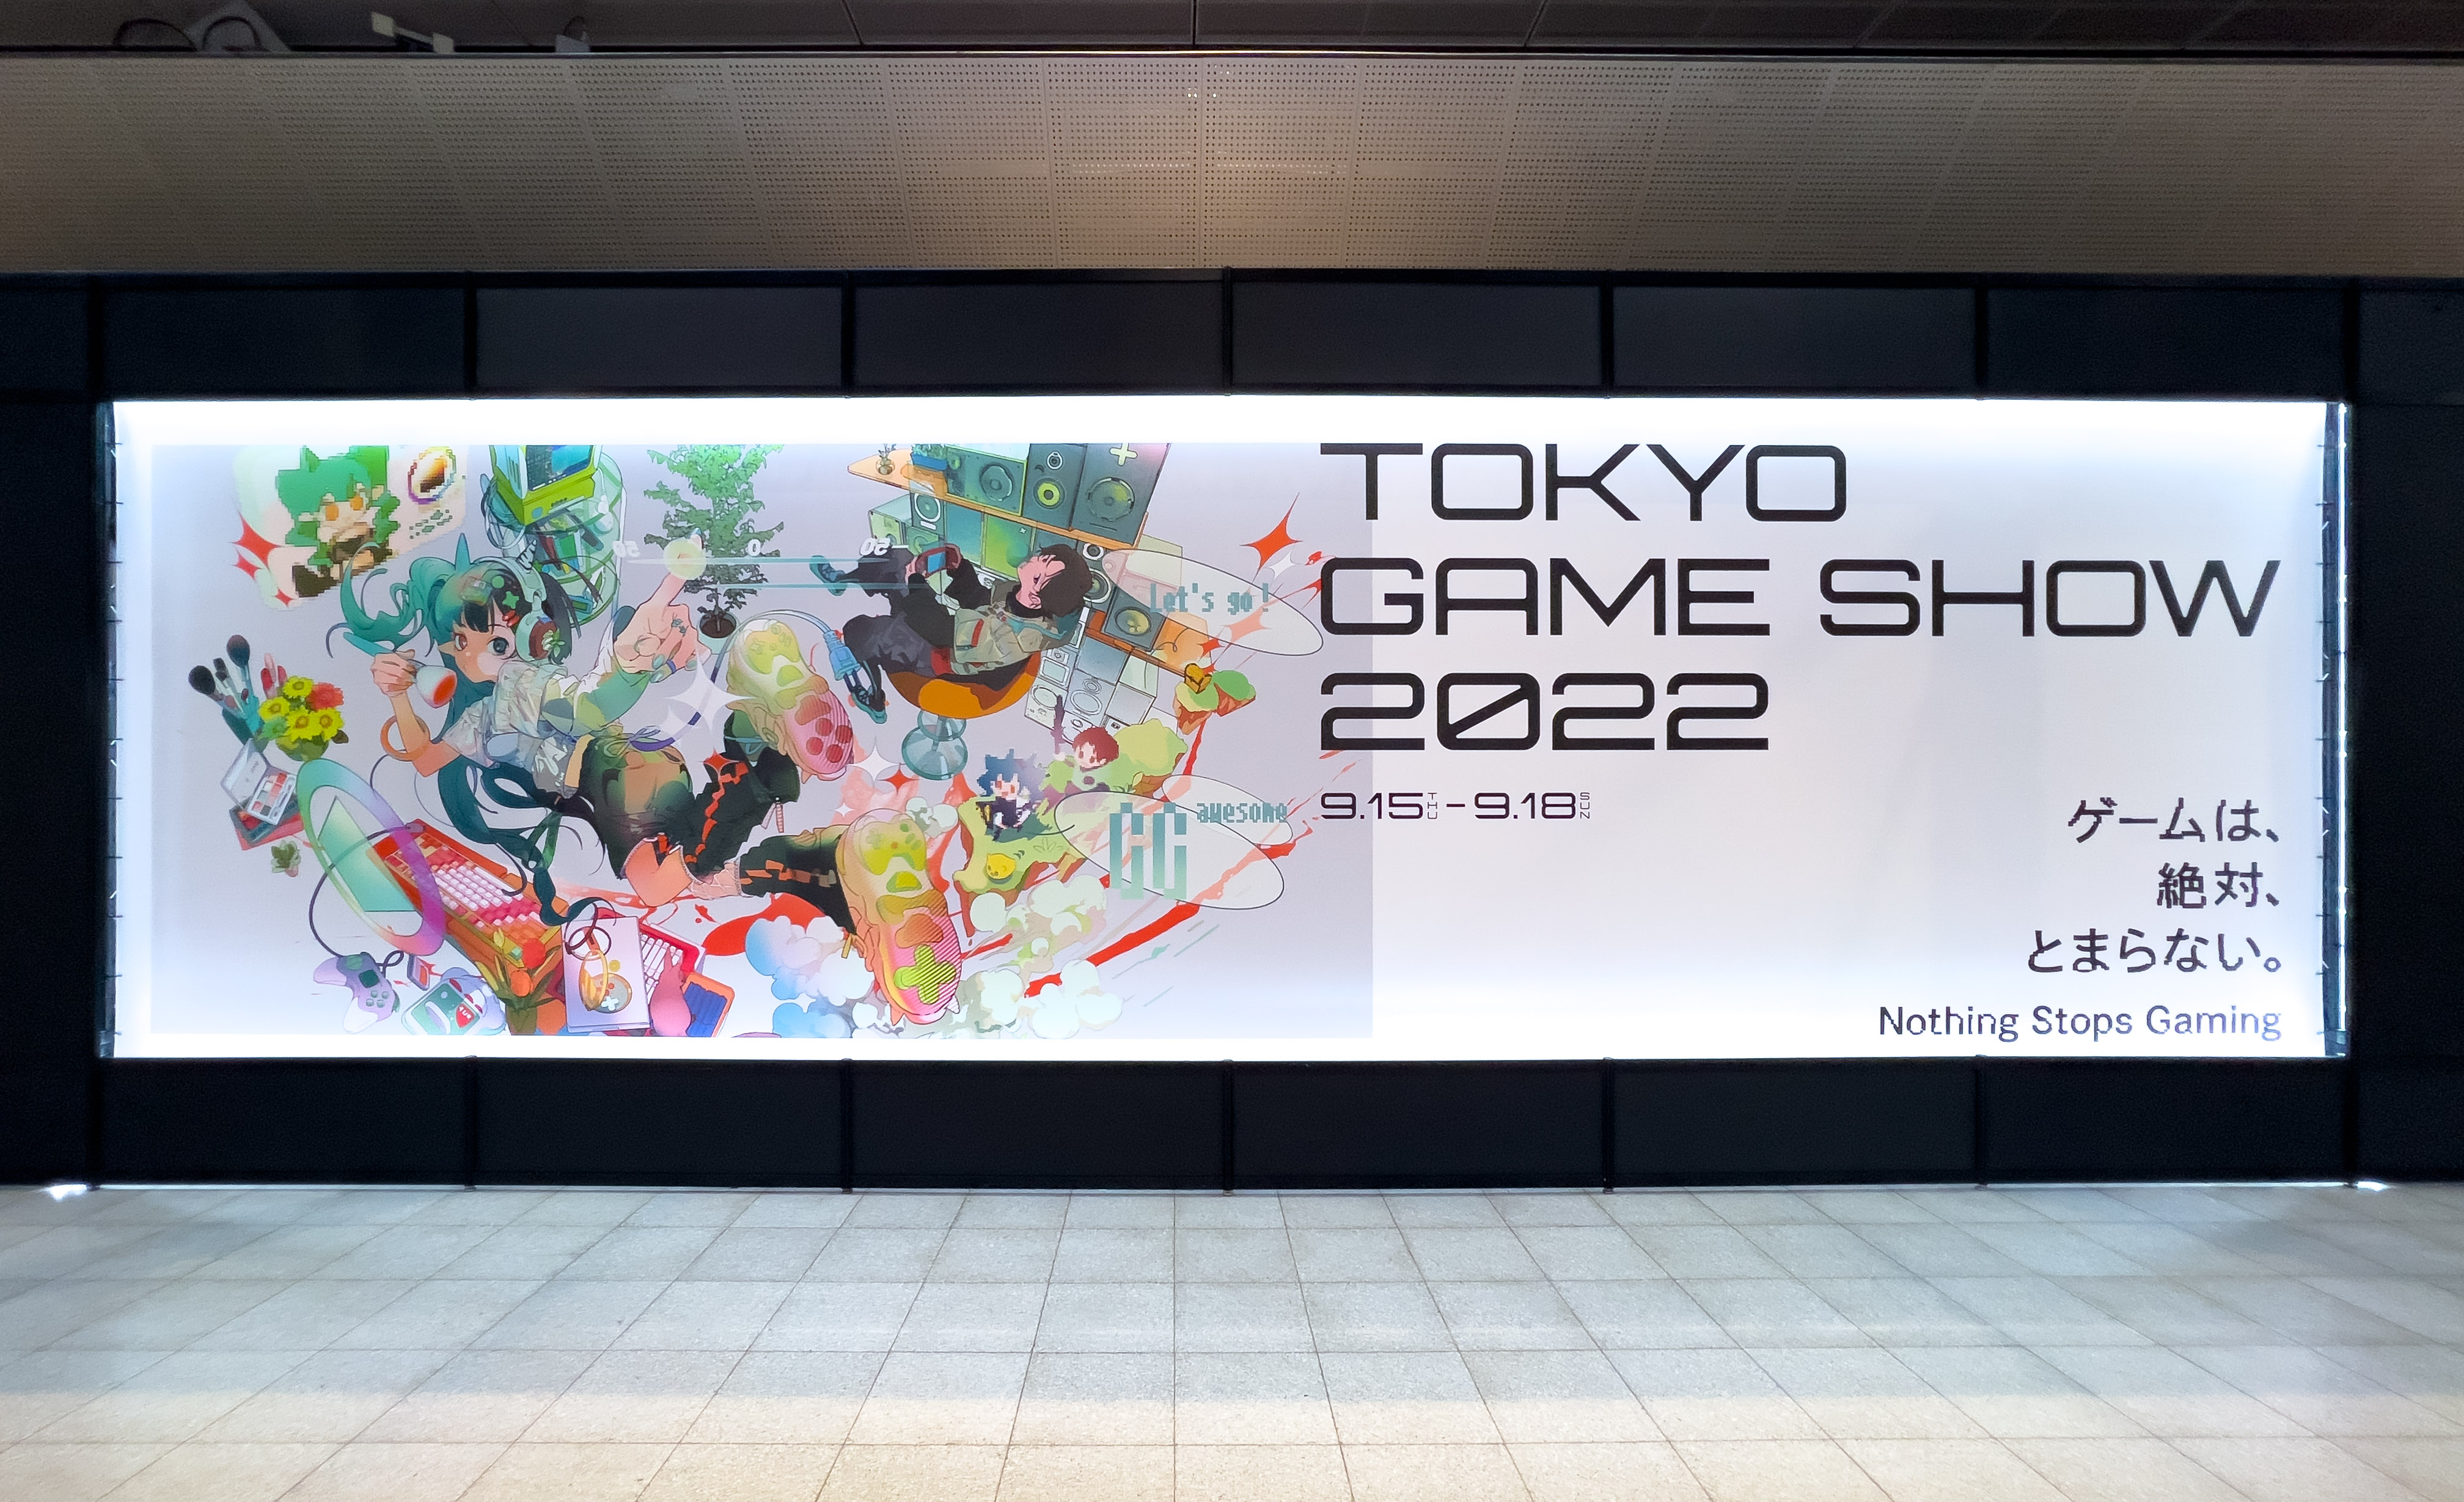 Tokyo Game Show Records Over 130,000 For First In-Person Show in 3 Years